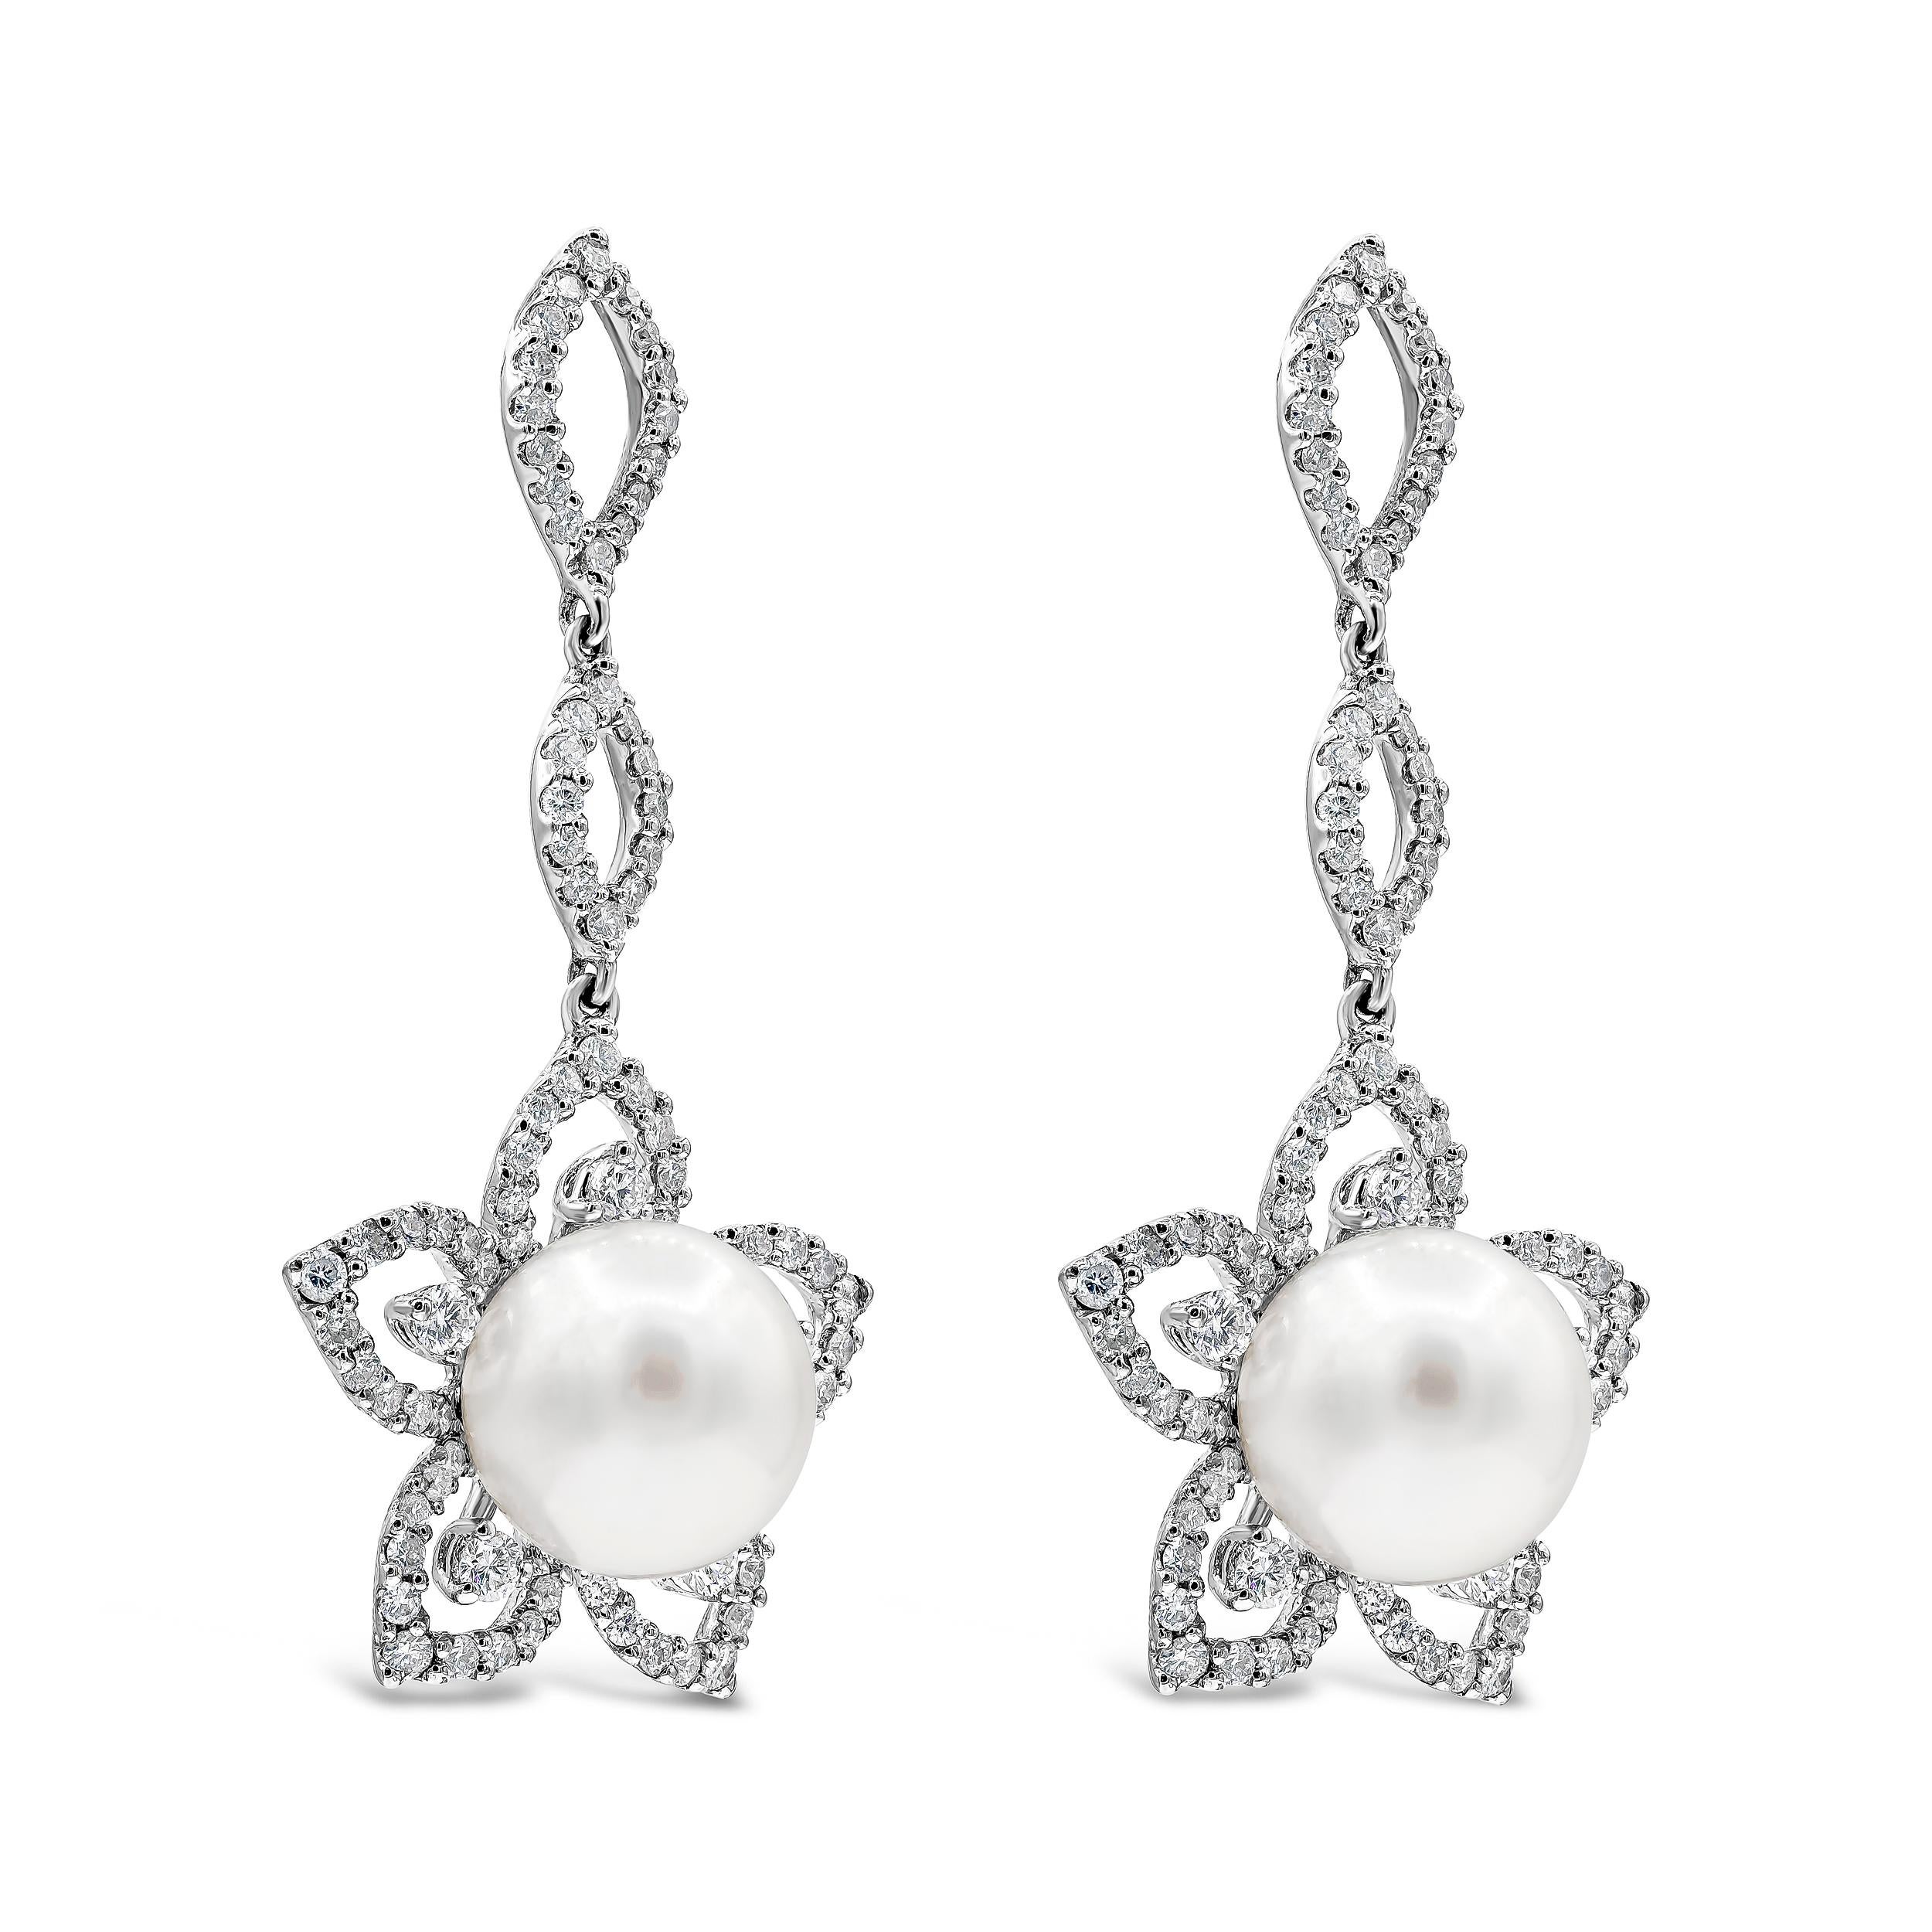 A unique pair of earrings of open-work design showcasing a white pearl set in a floral motif setting encrusted with round brilliant diamonds. Suspended on a line of round diamonds arranged in a marquise shape design. Diamonds weigh 1.88 carats